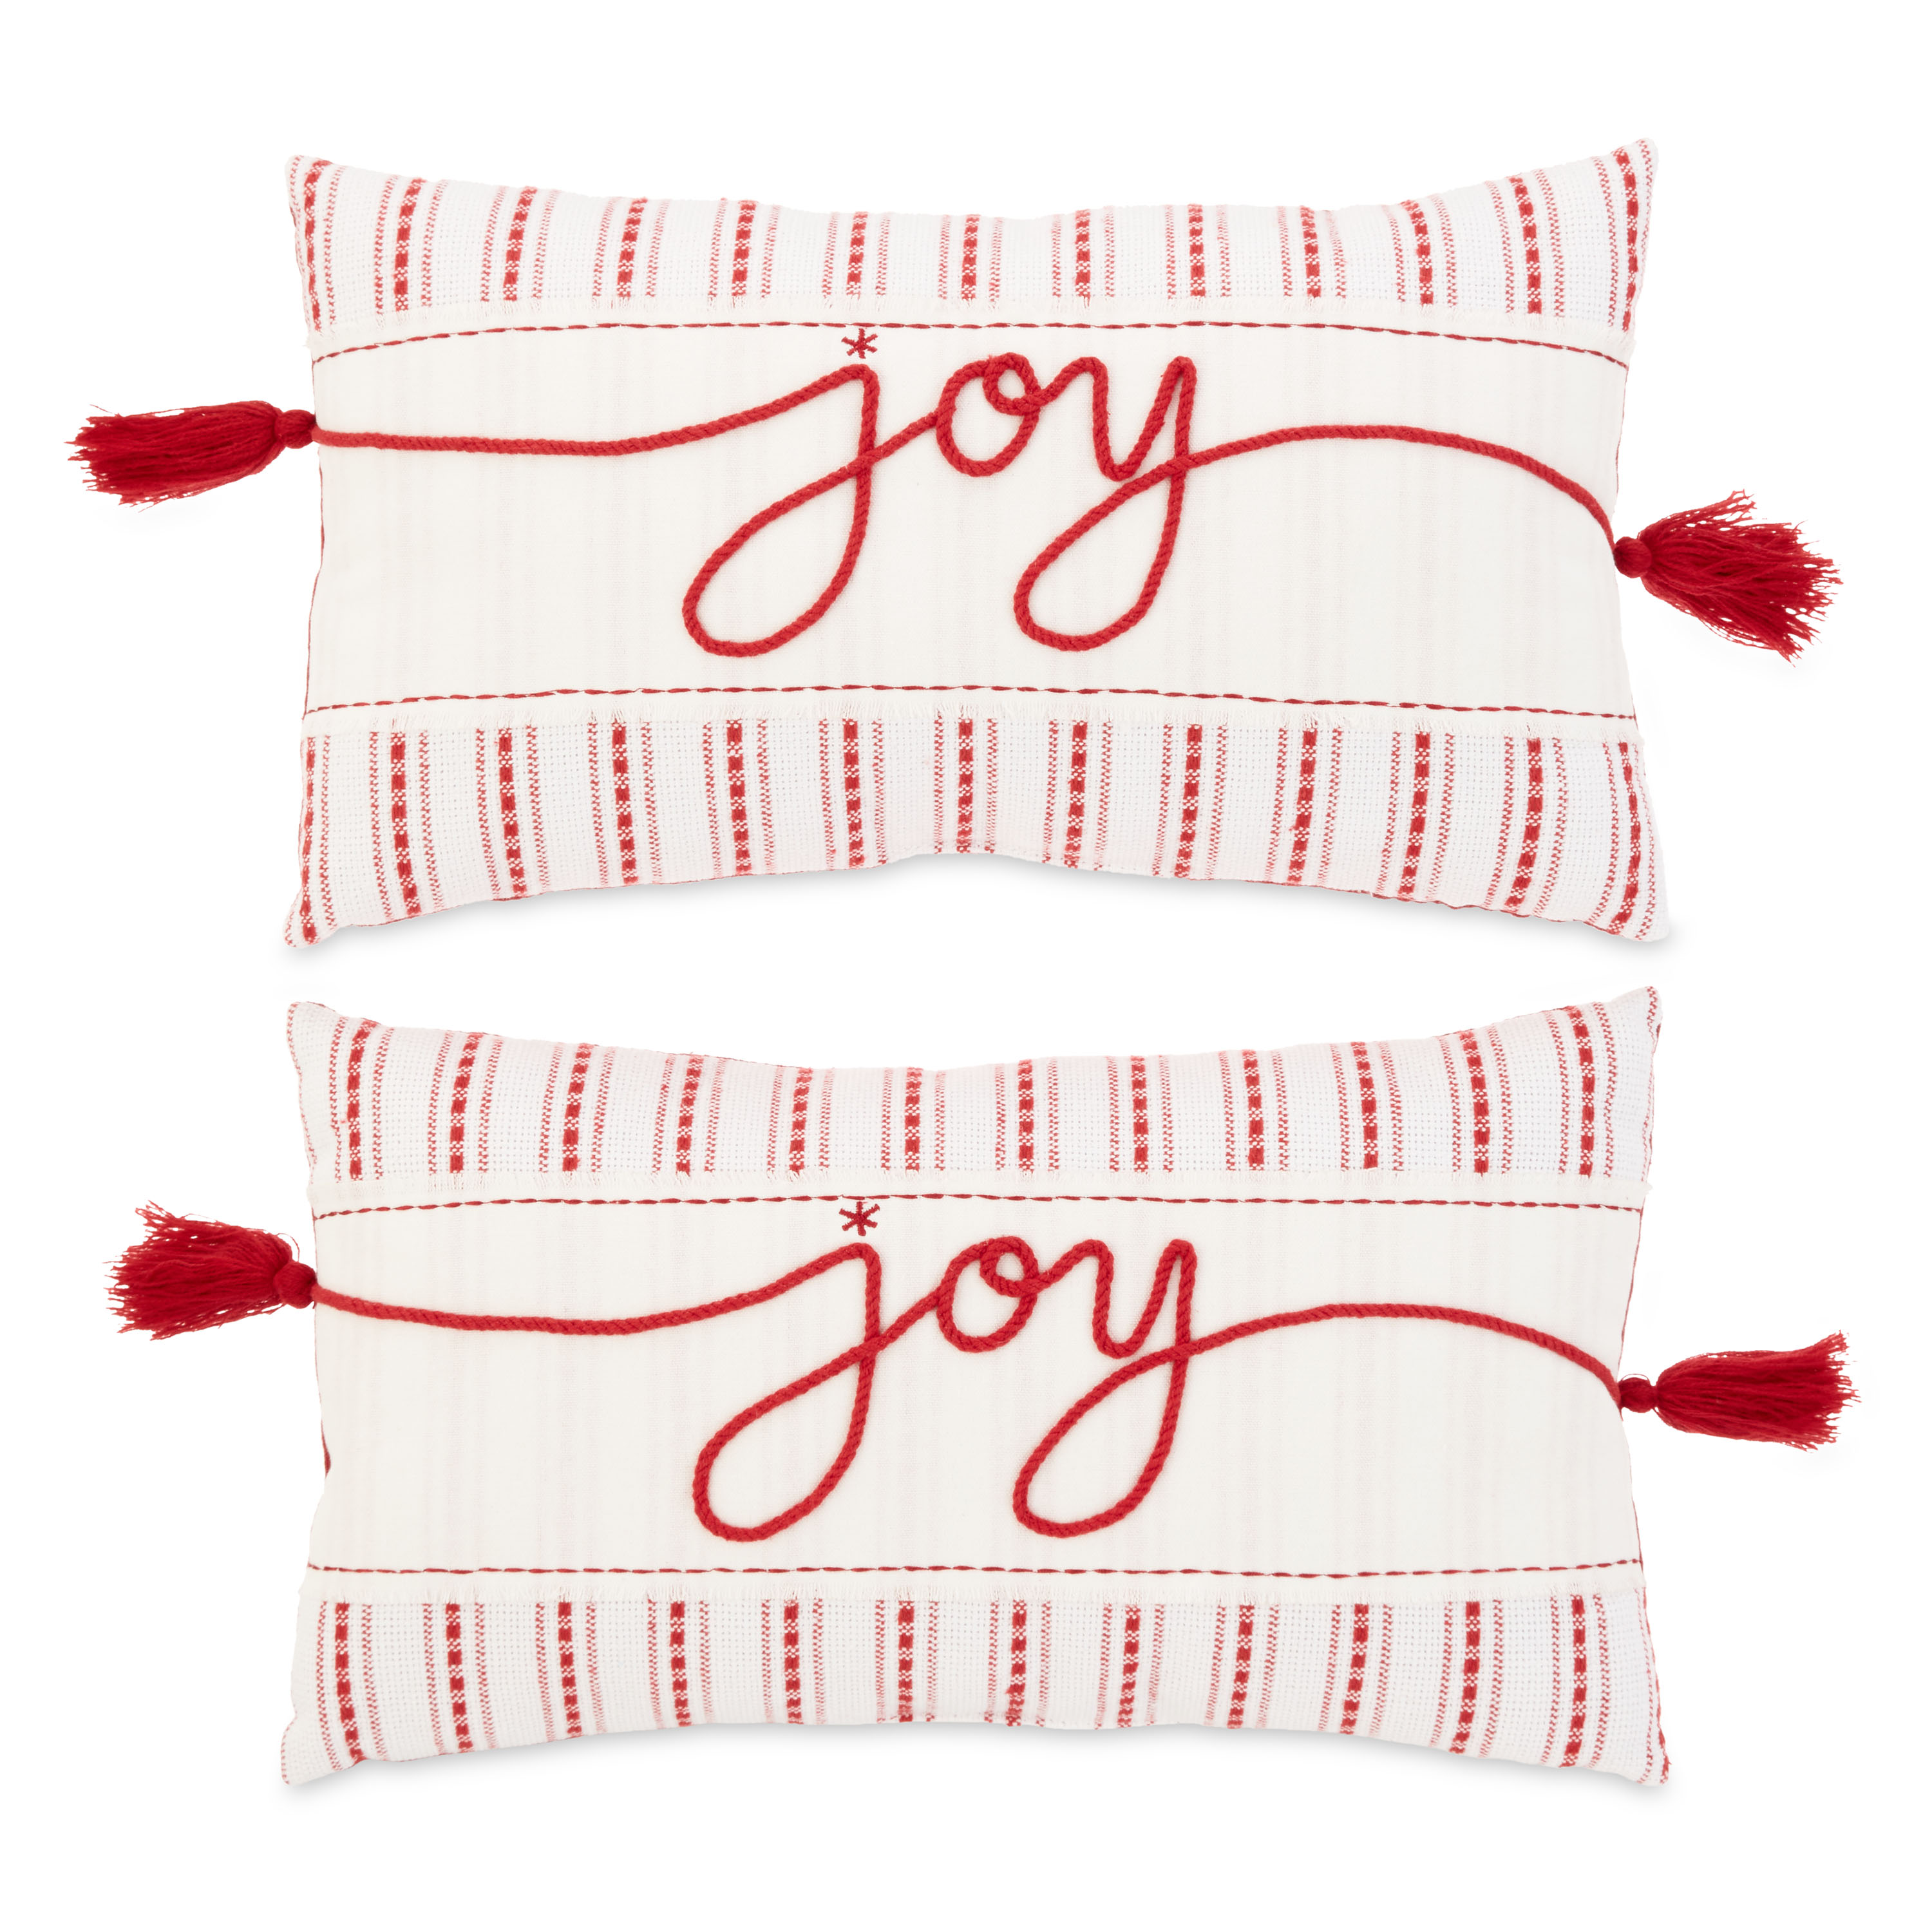 Holiday Time Joy Lumbar Christmas Decorative Pillows, 9x16inch, 2 Count Per Pack - image 3 of 6